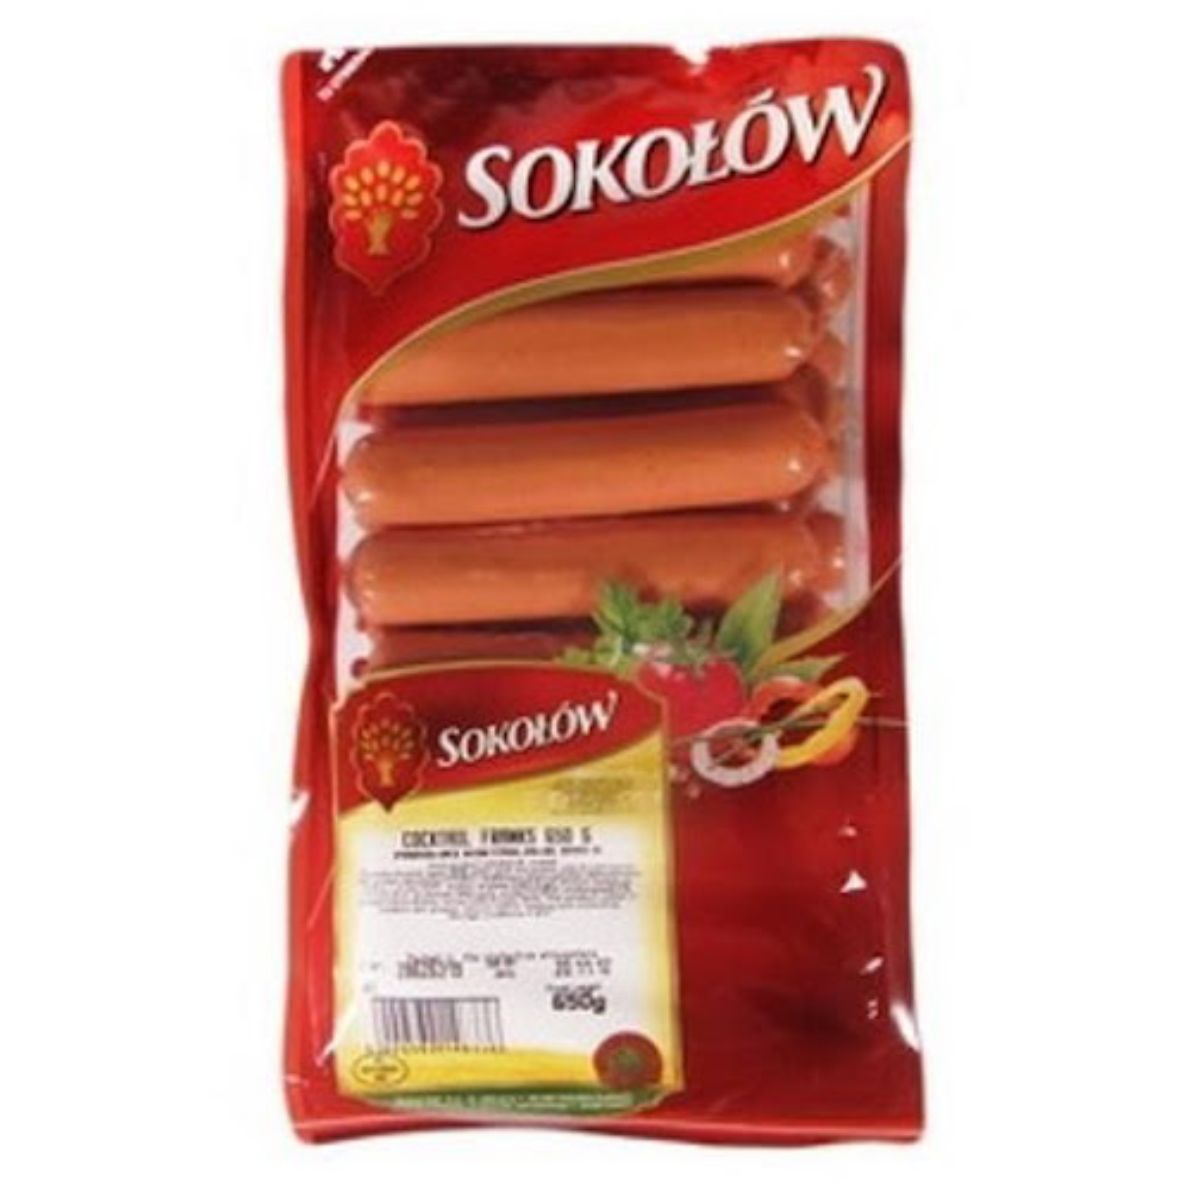 Packaging of Sokolow Cocktail Franks - 650g in a clear and red bag, displaying the product and label with weight and nutritional information.